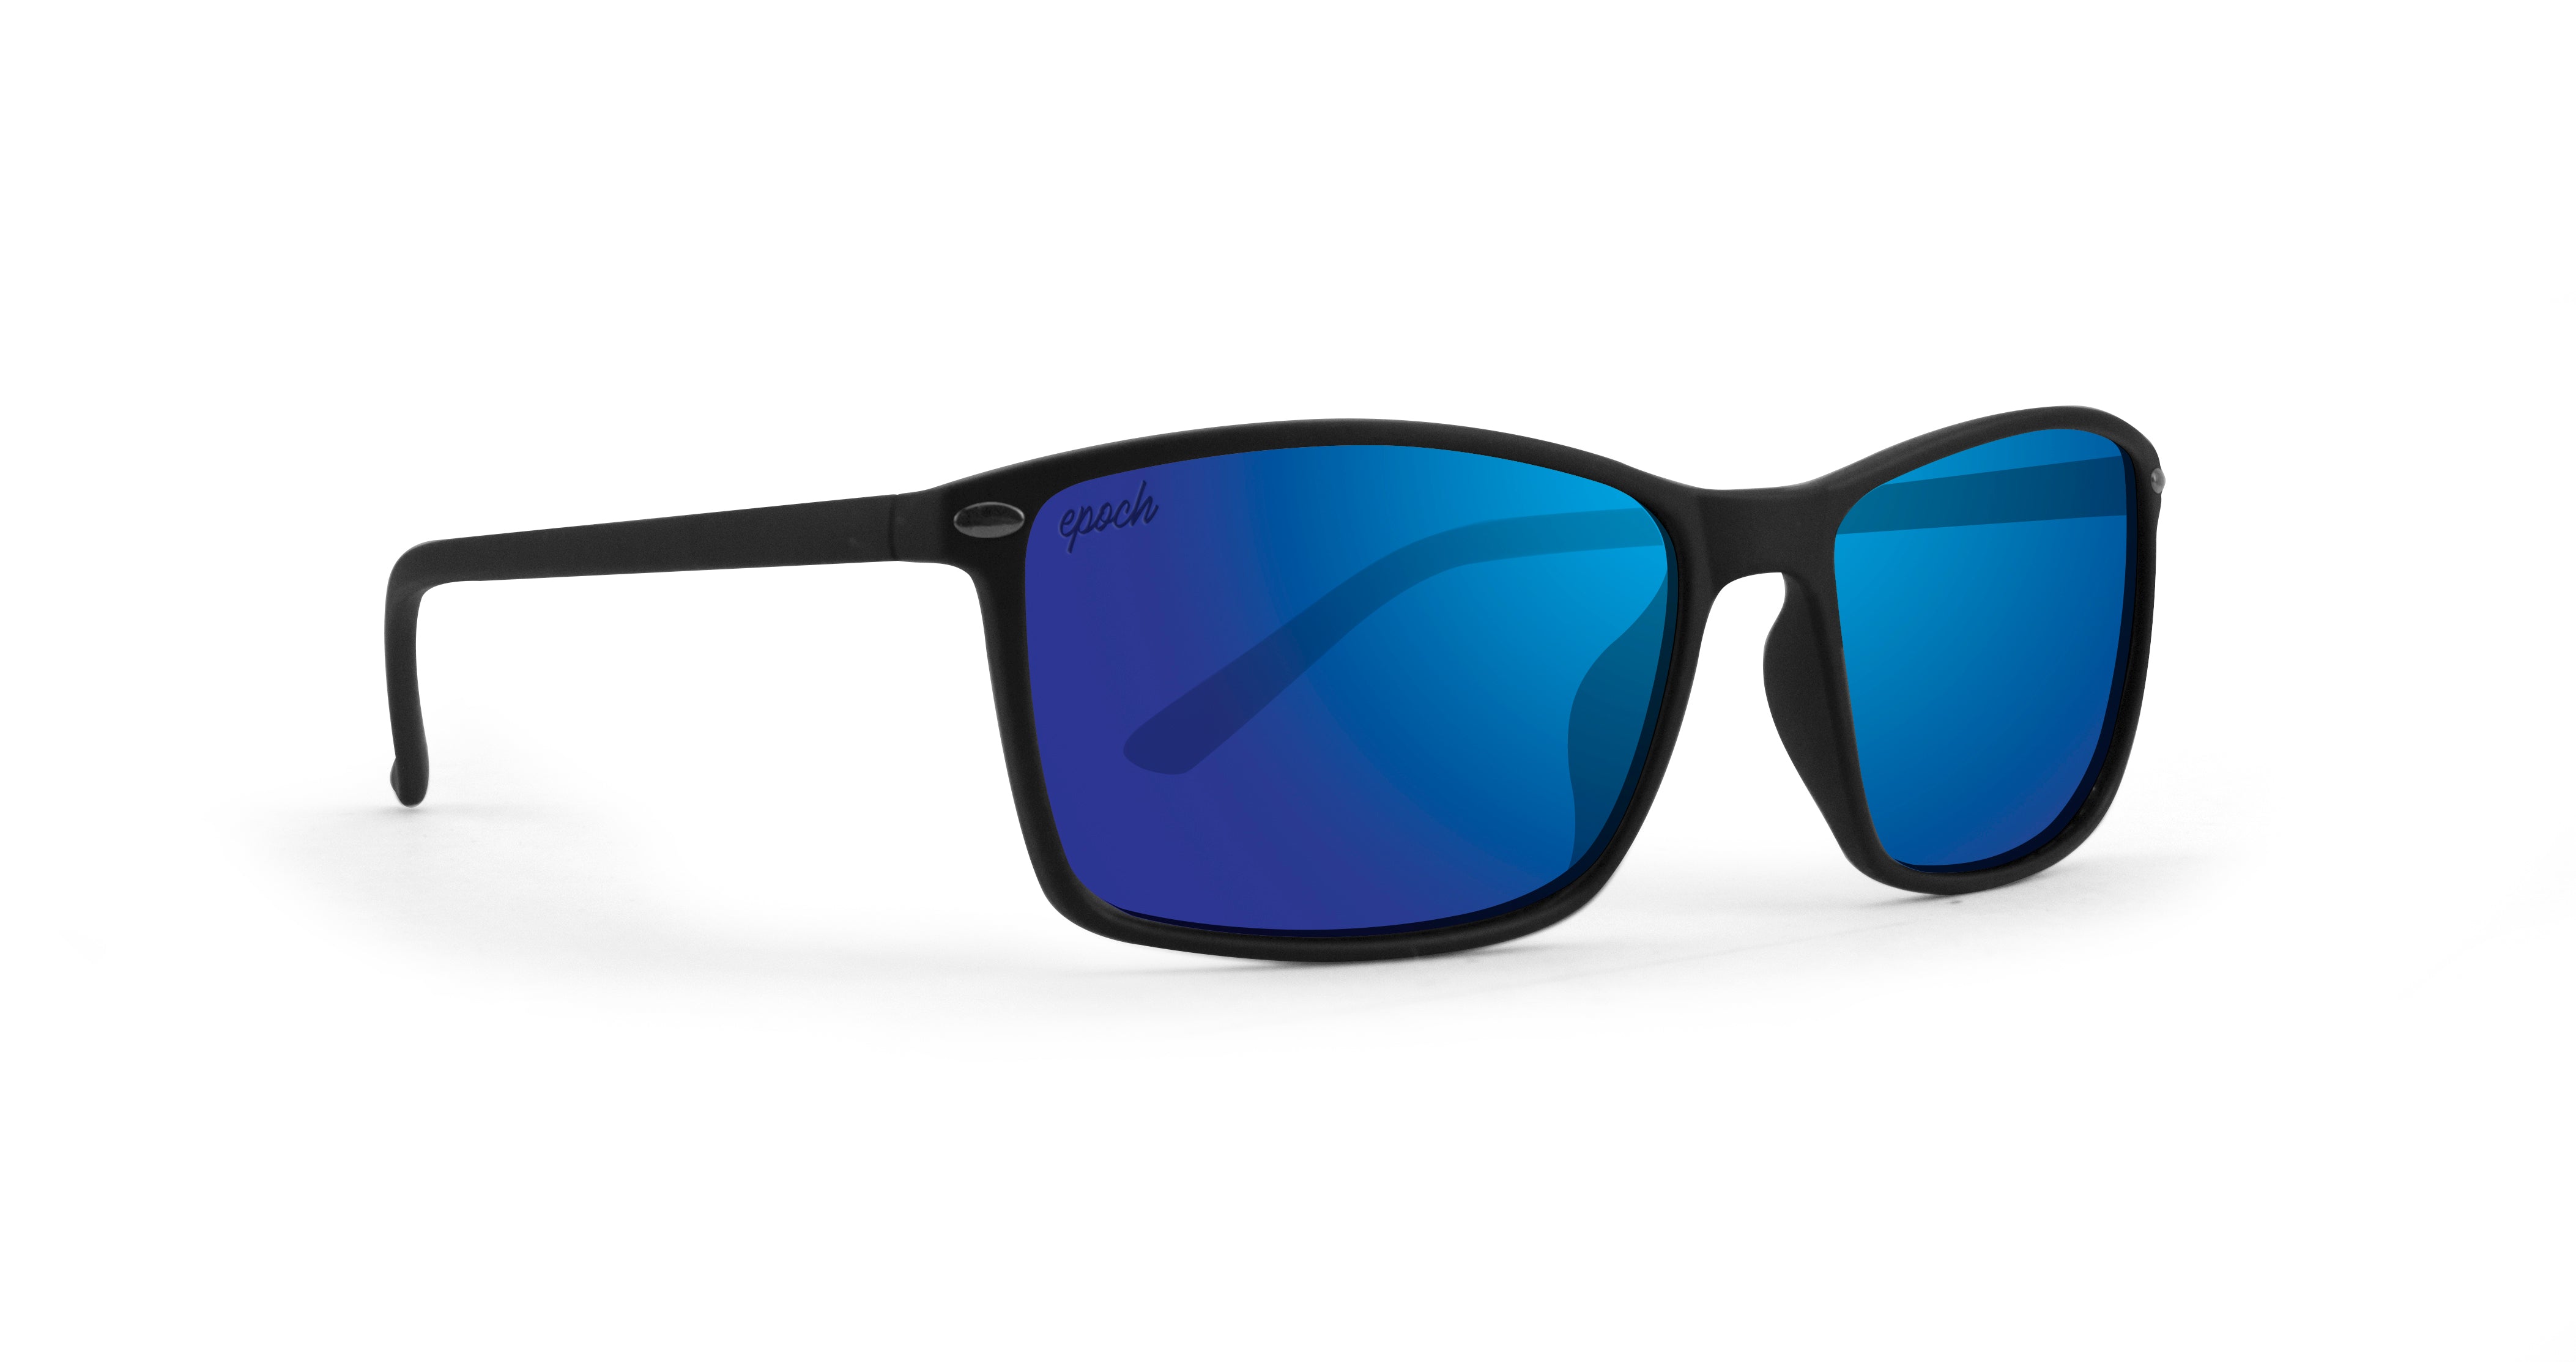 Murphy Sunglasses with black frame and polarized blue lenses by Epoch Eyewear